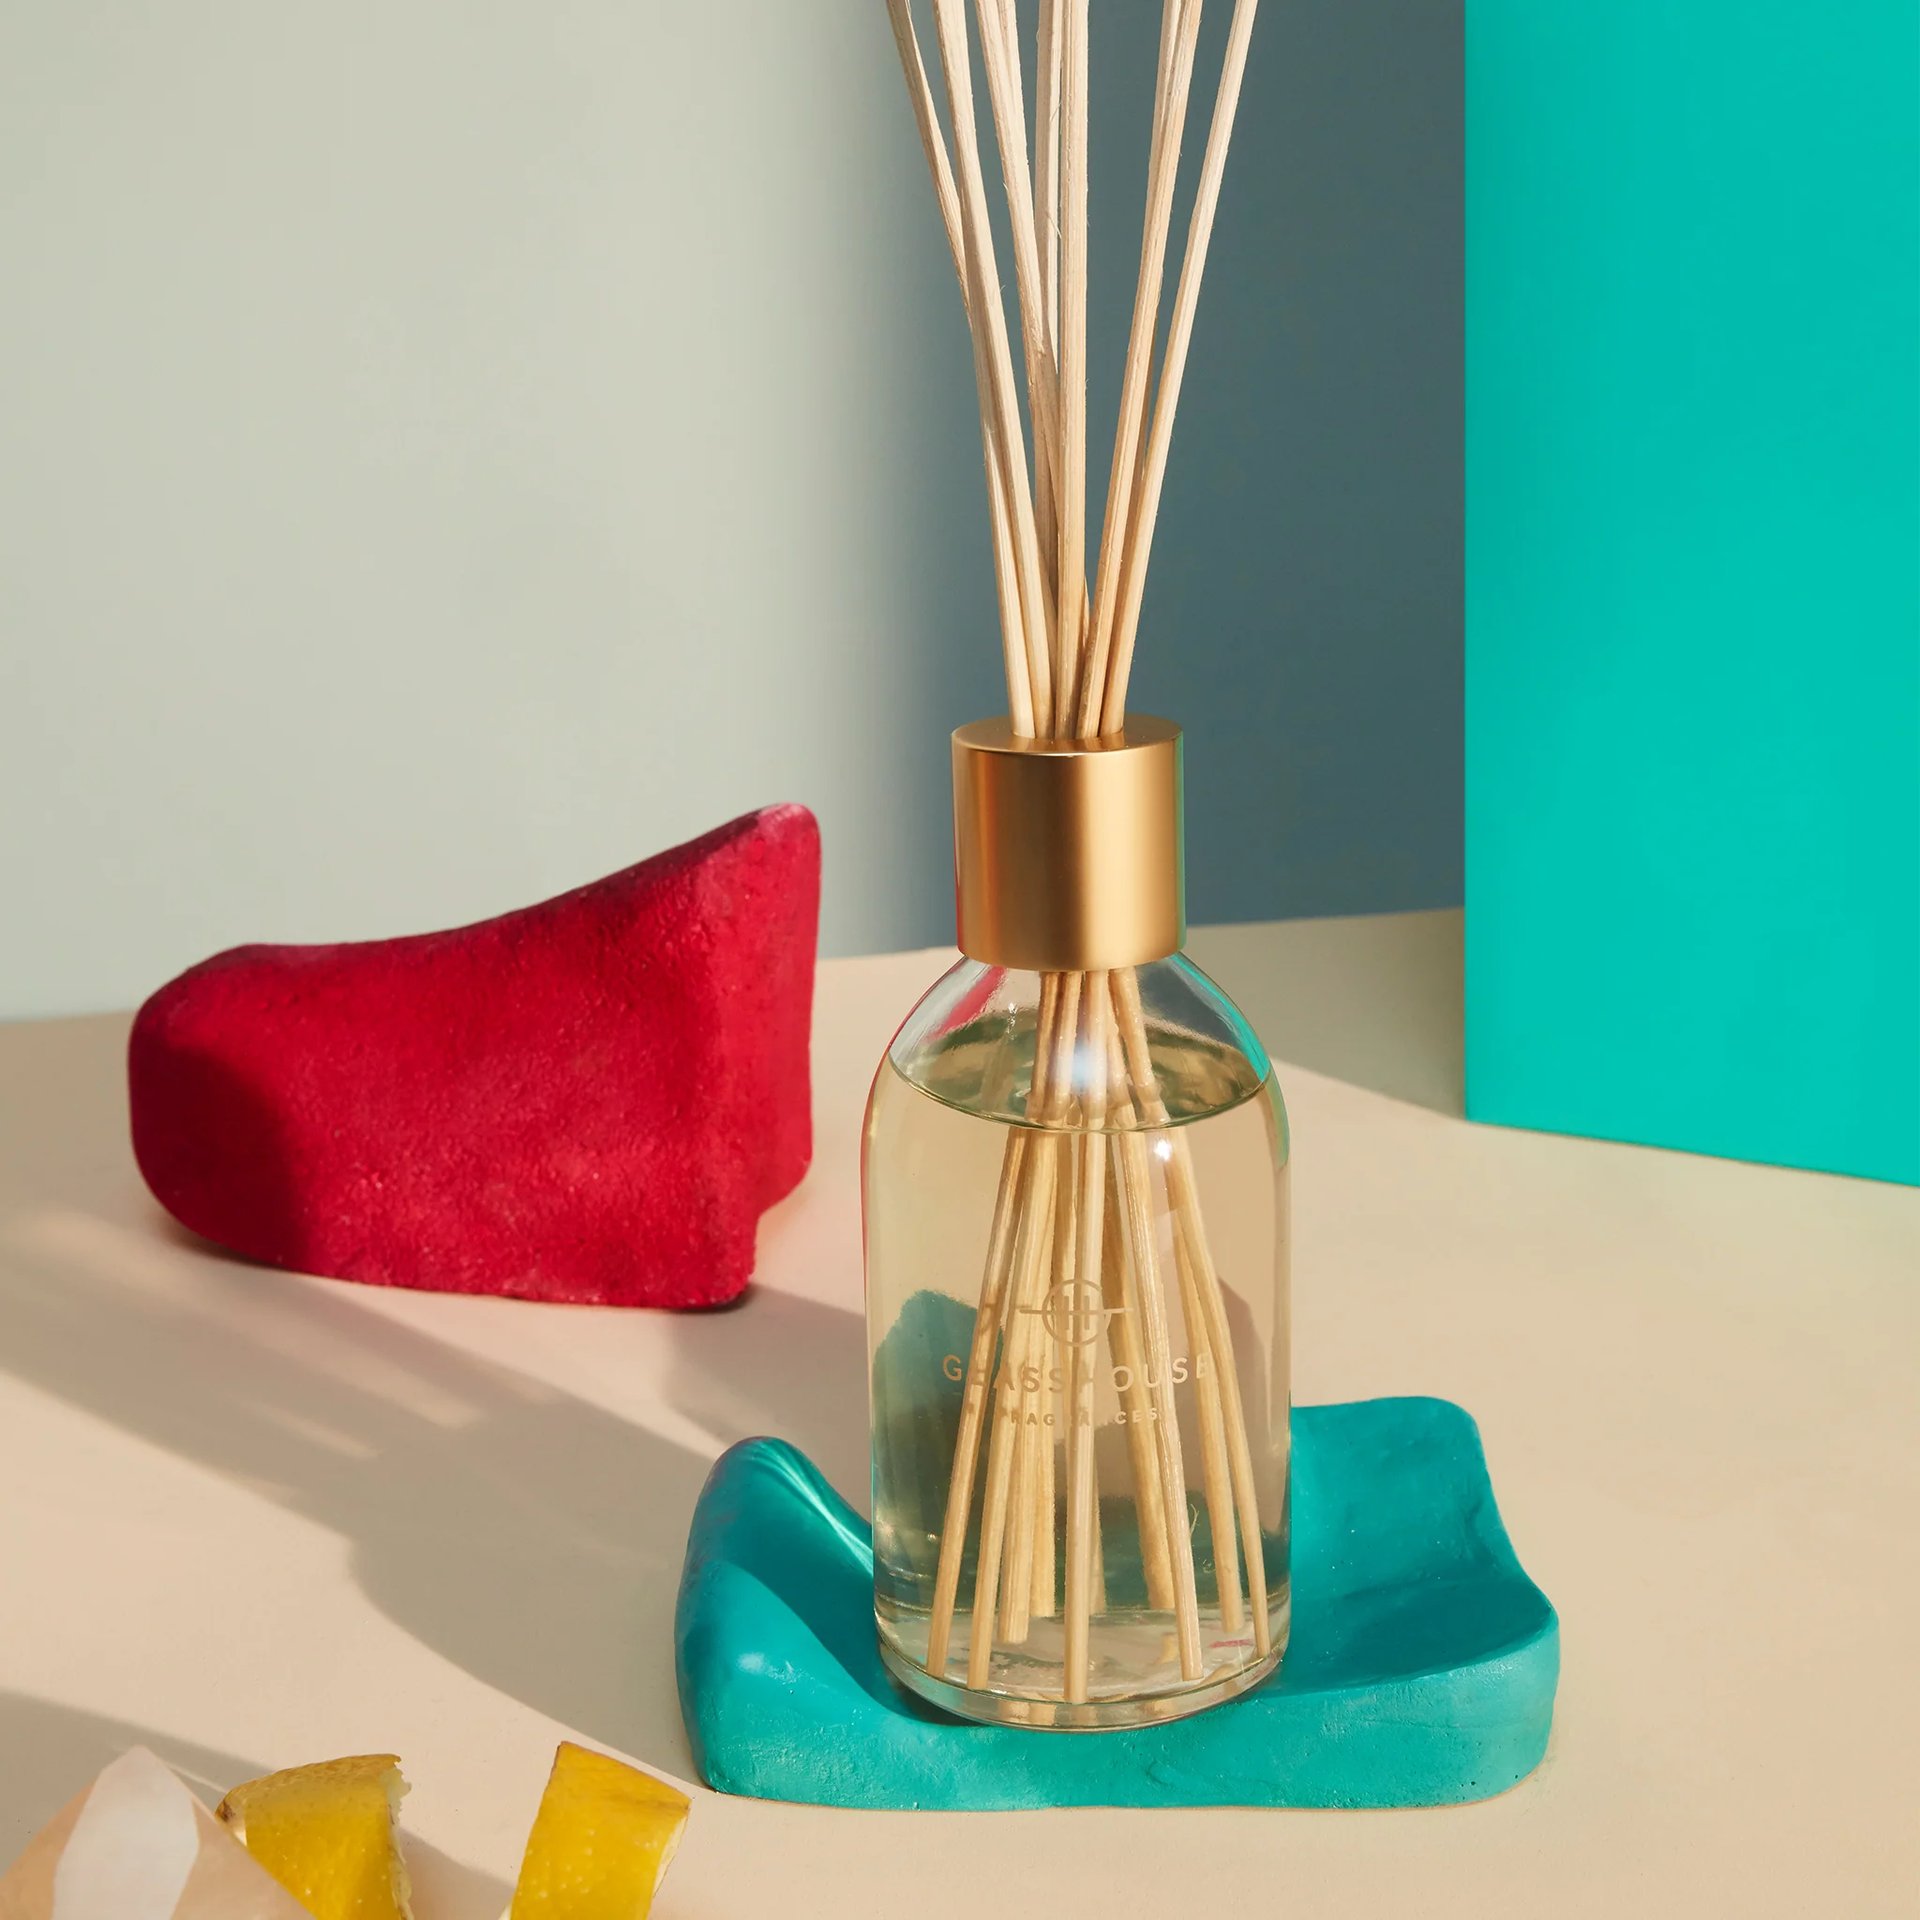 A Tahaa - Glasshouse Diffuser on a table next to a pair of shoes.